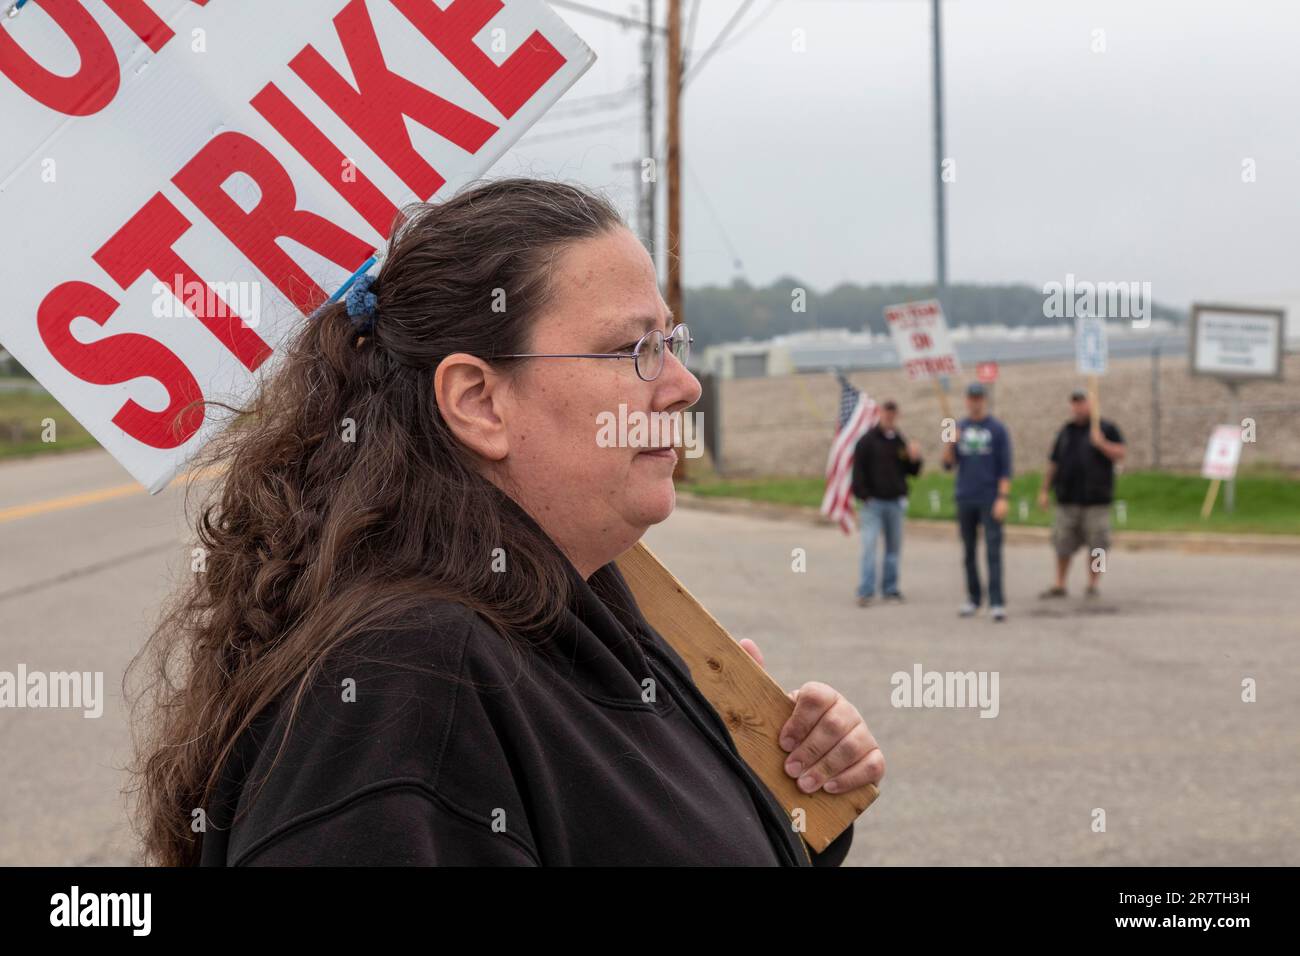 Battle Creek, Michigan, Sonia Hughes pickets the Kellogg cereal plant. Members of the Bakery Workers union are on strike at all four U.S. Kellogg's Stock Photo